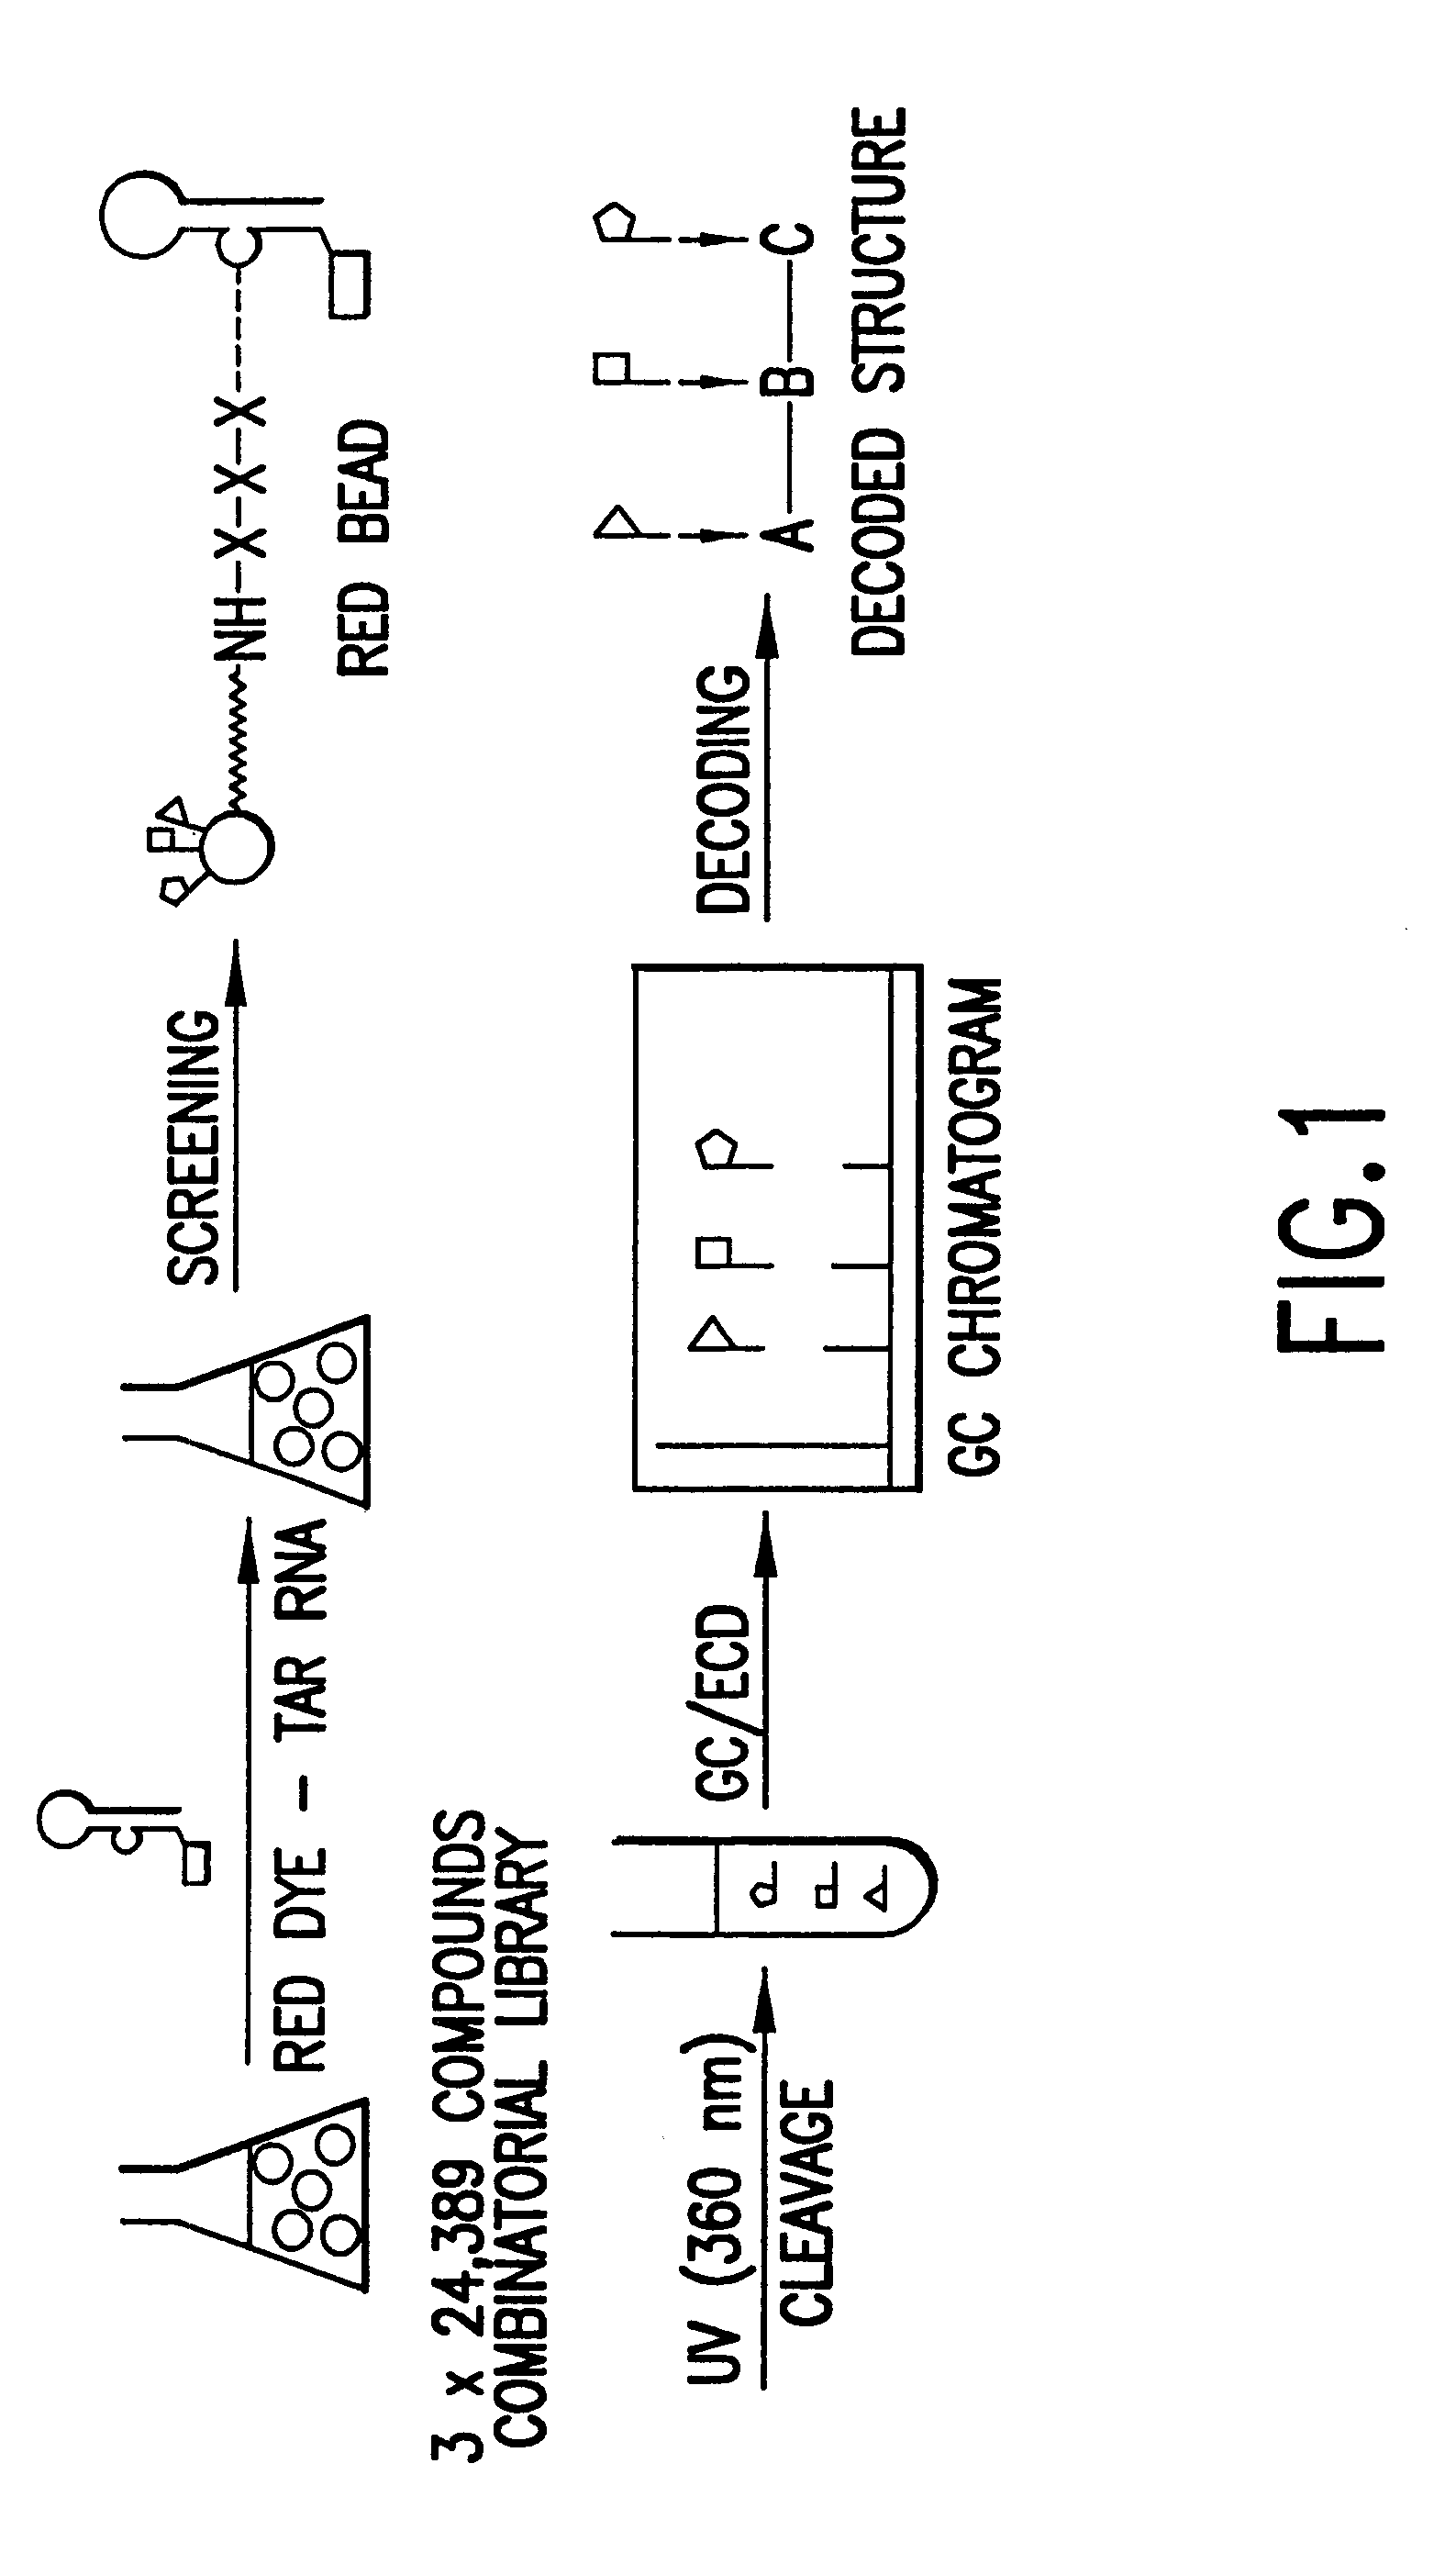 Methods for identifying RNA binding compounds